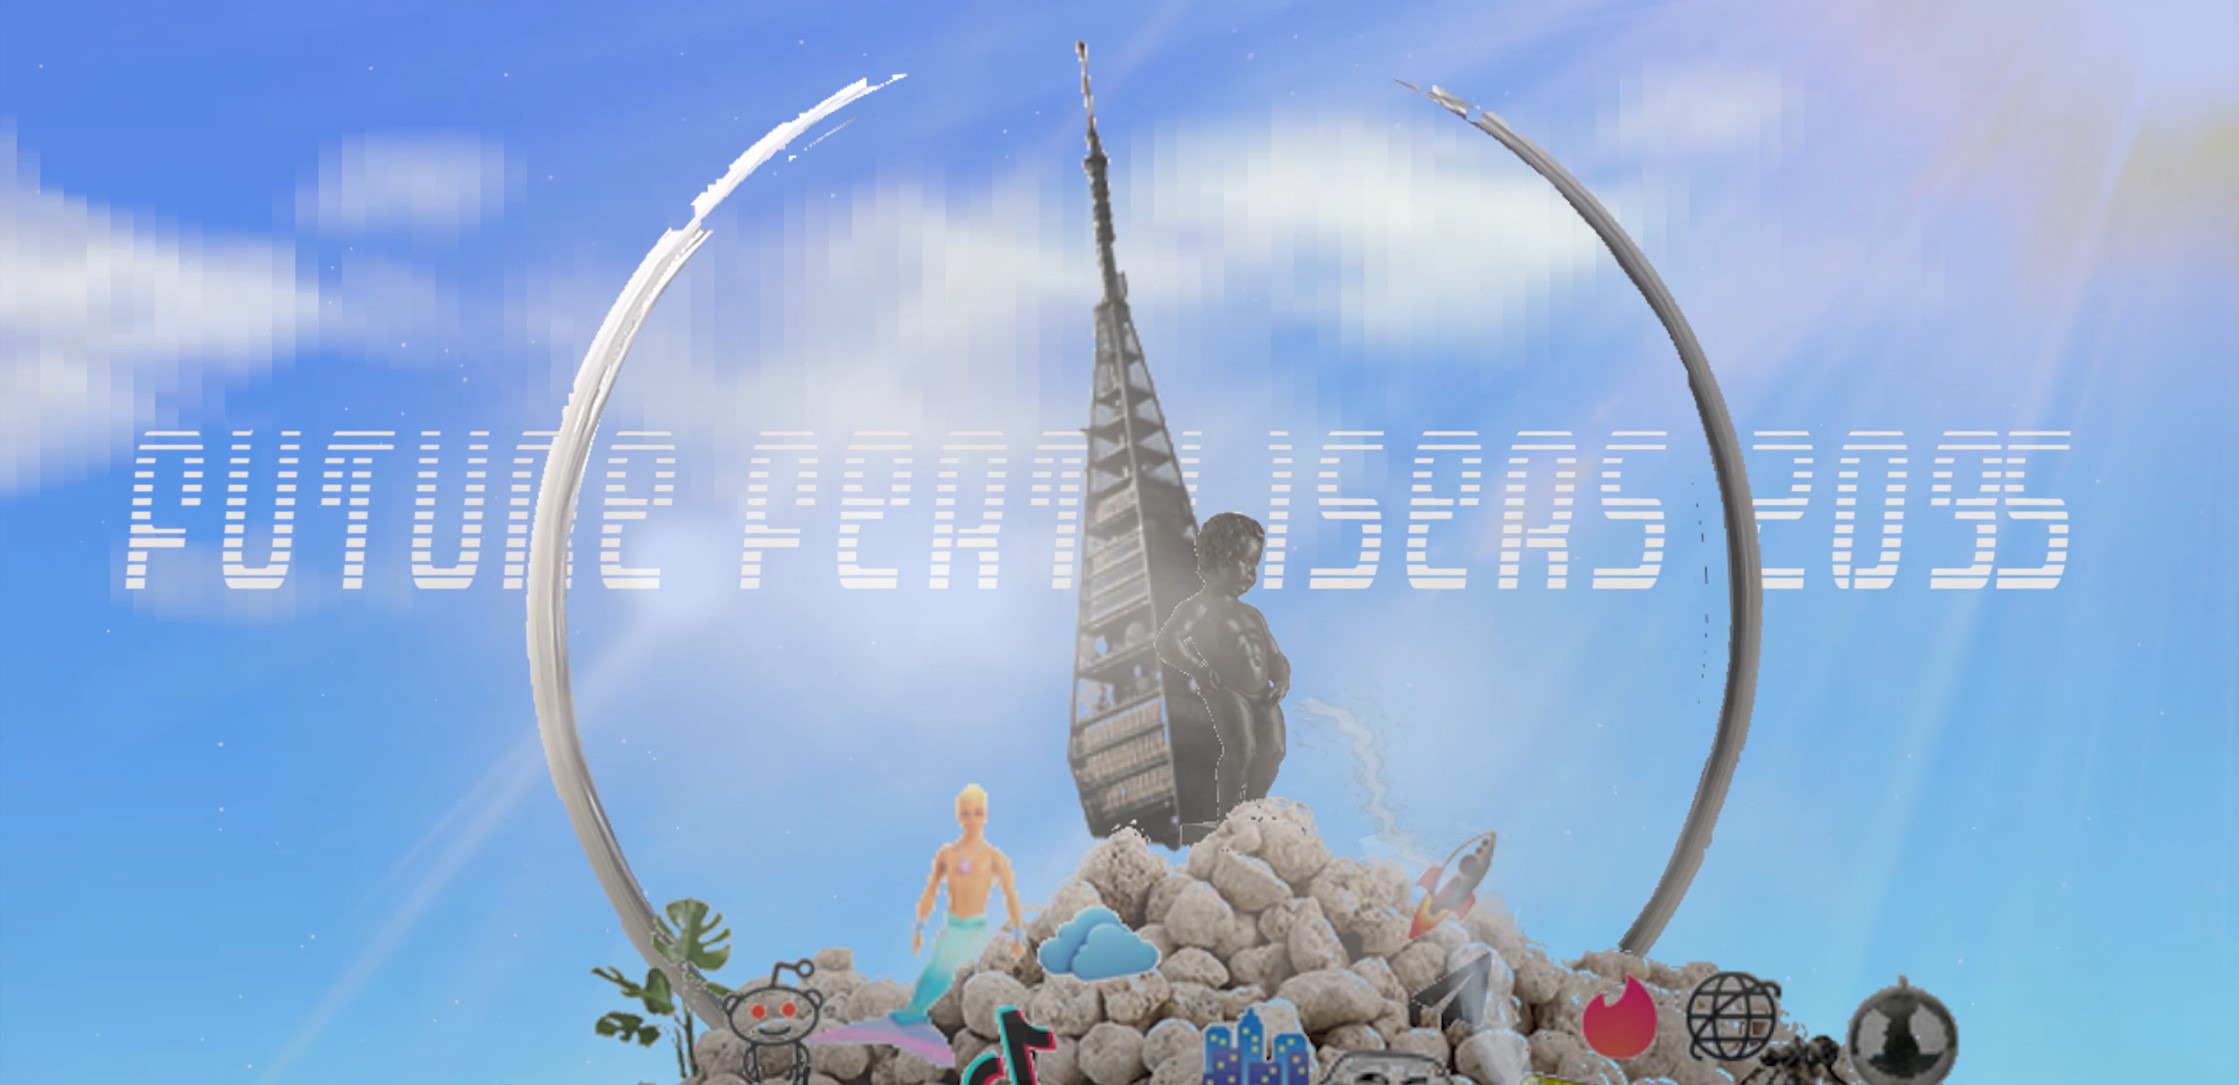 text "future fertilisers", blue sky, Bratislava television tower and Manneken pis on the top app logos and stones